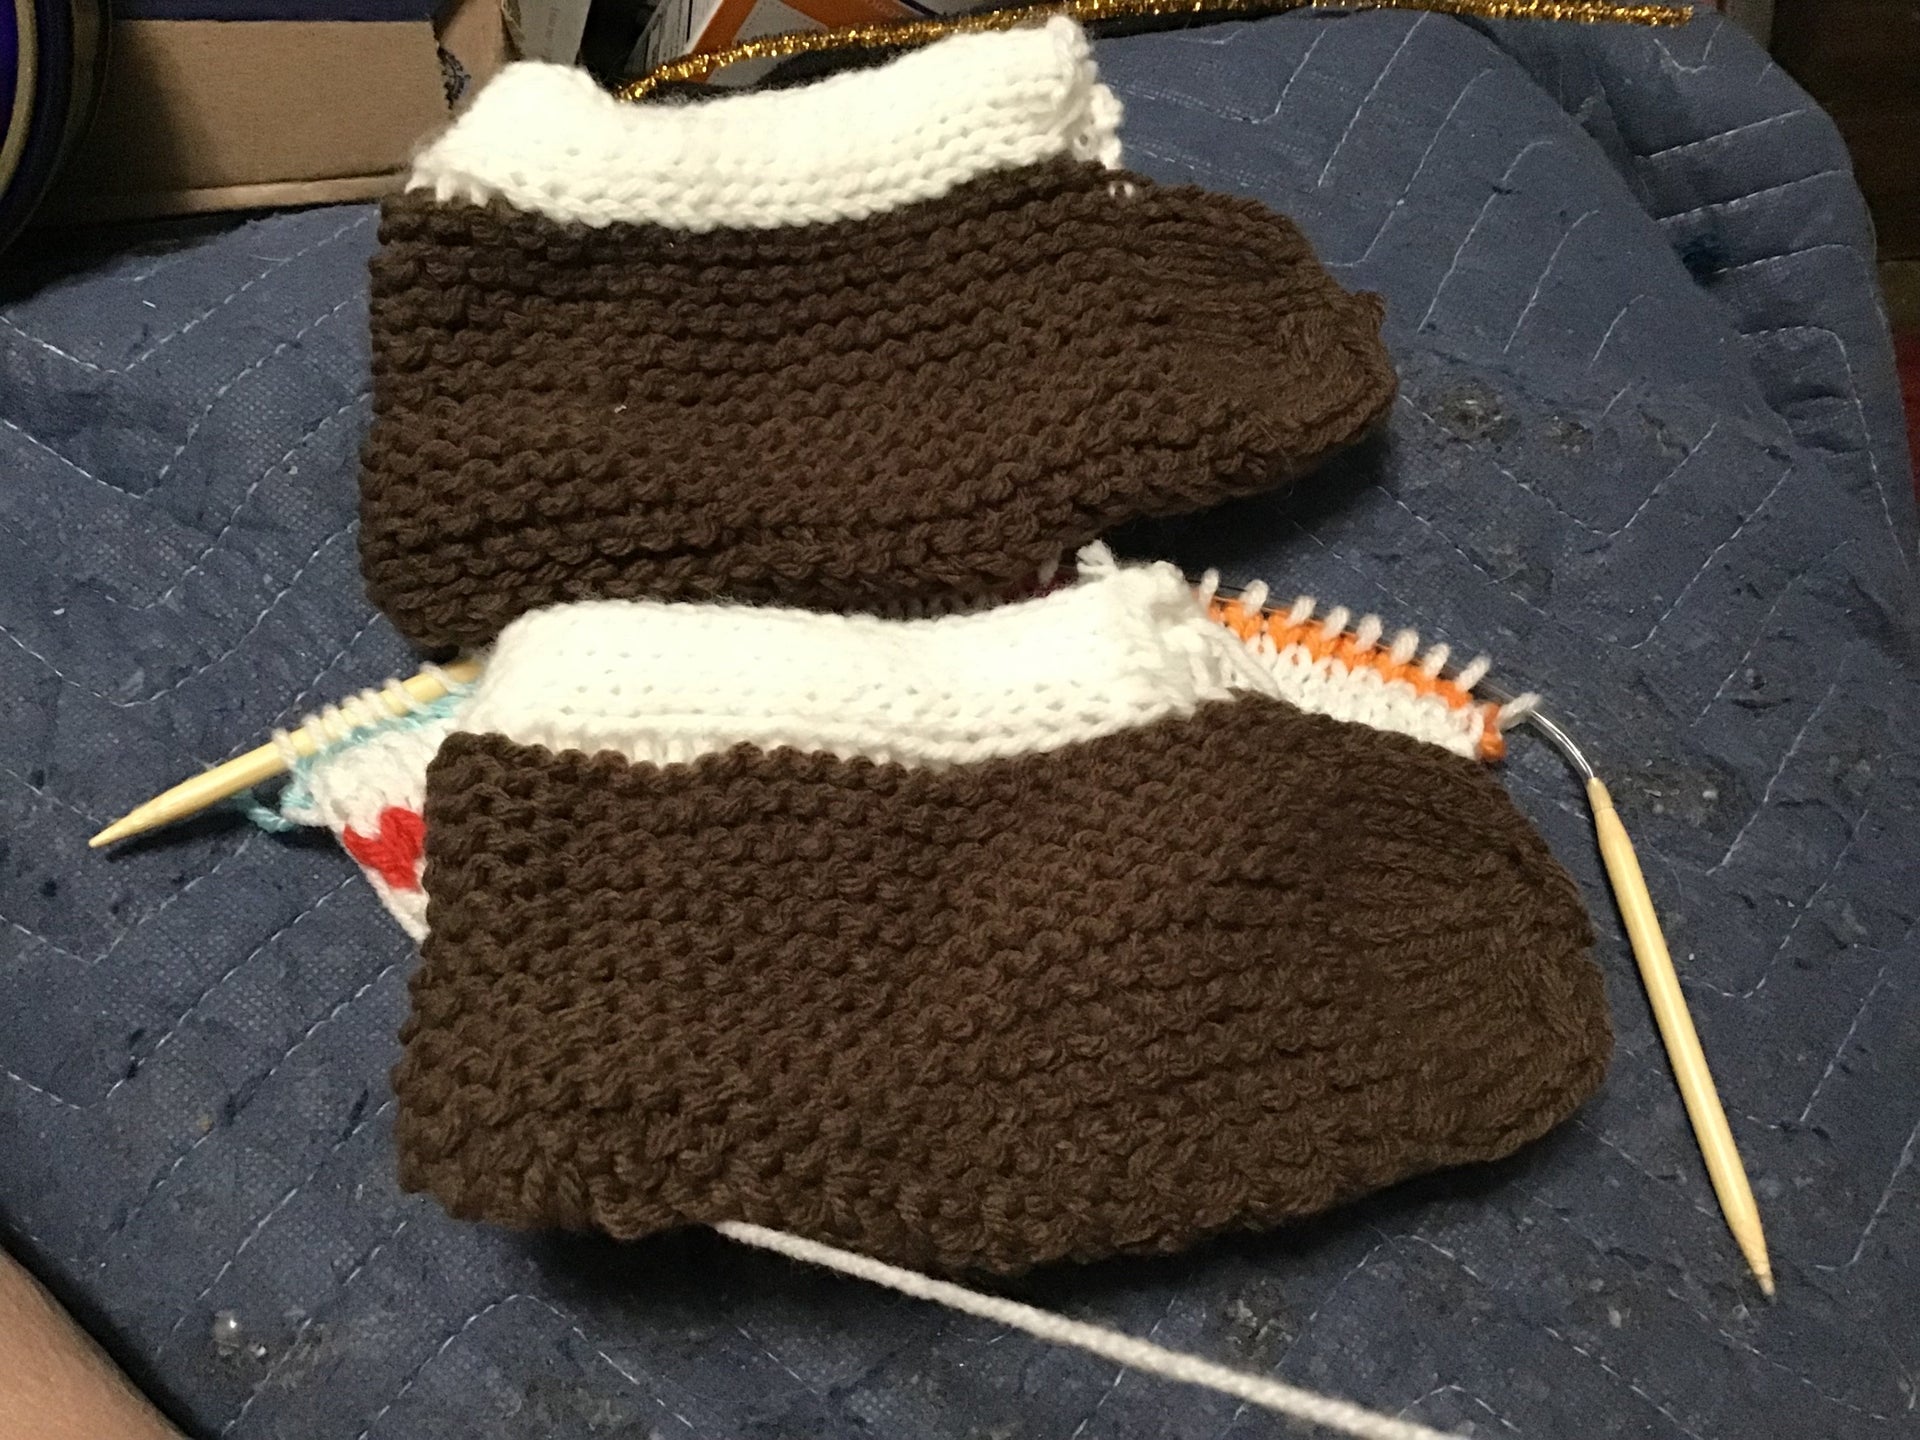 Anybody want to “test” a slipper pattern?